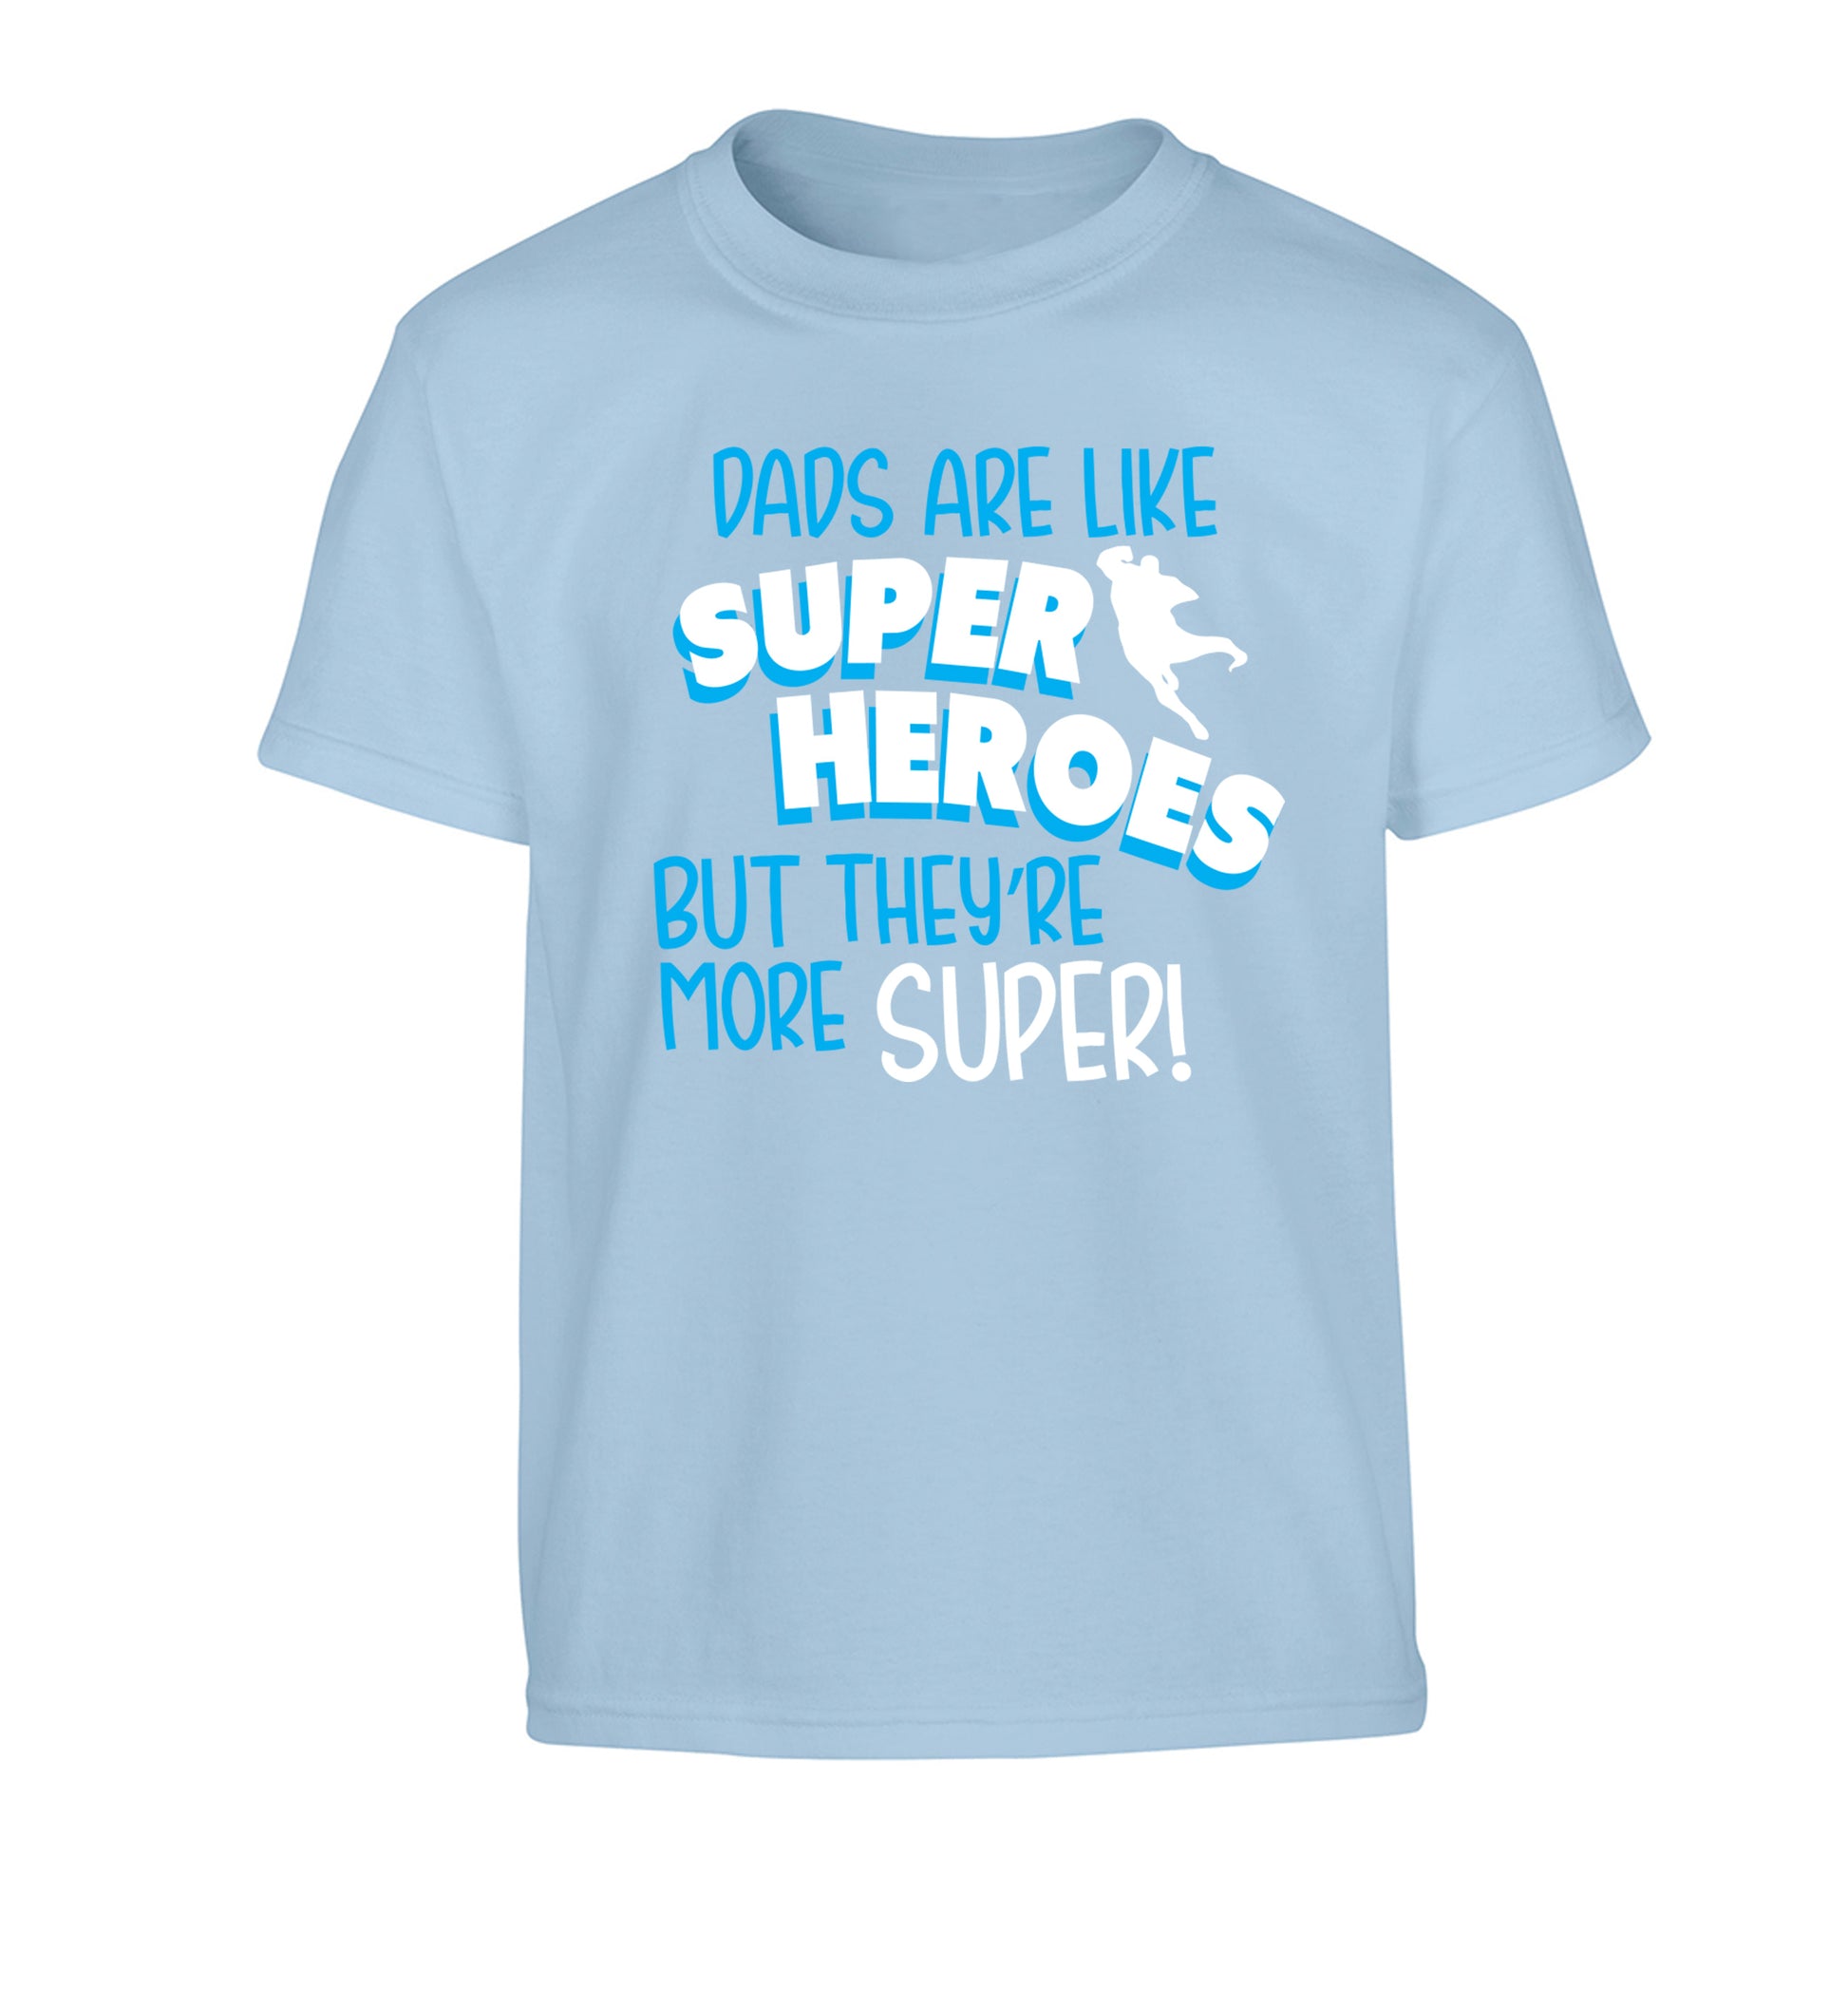 Dads are like superheros but they're more super Children's light blue Tshirt 12-13 Years